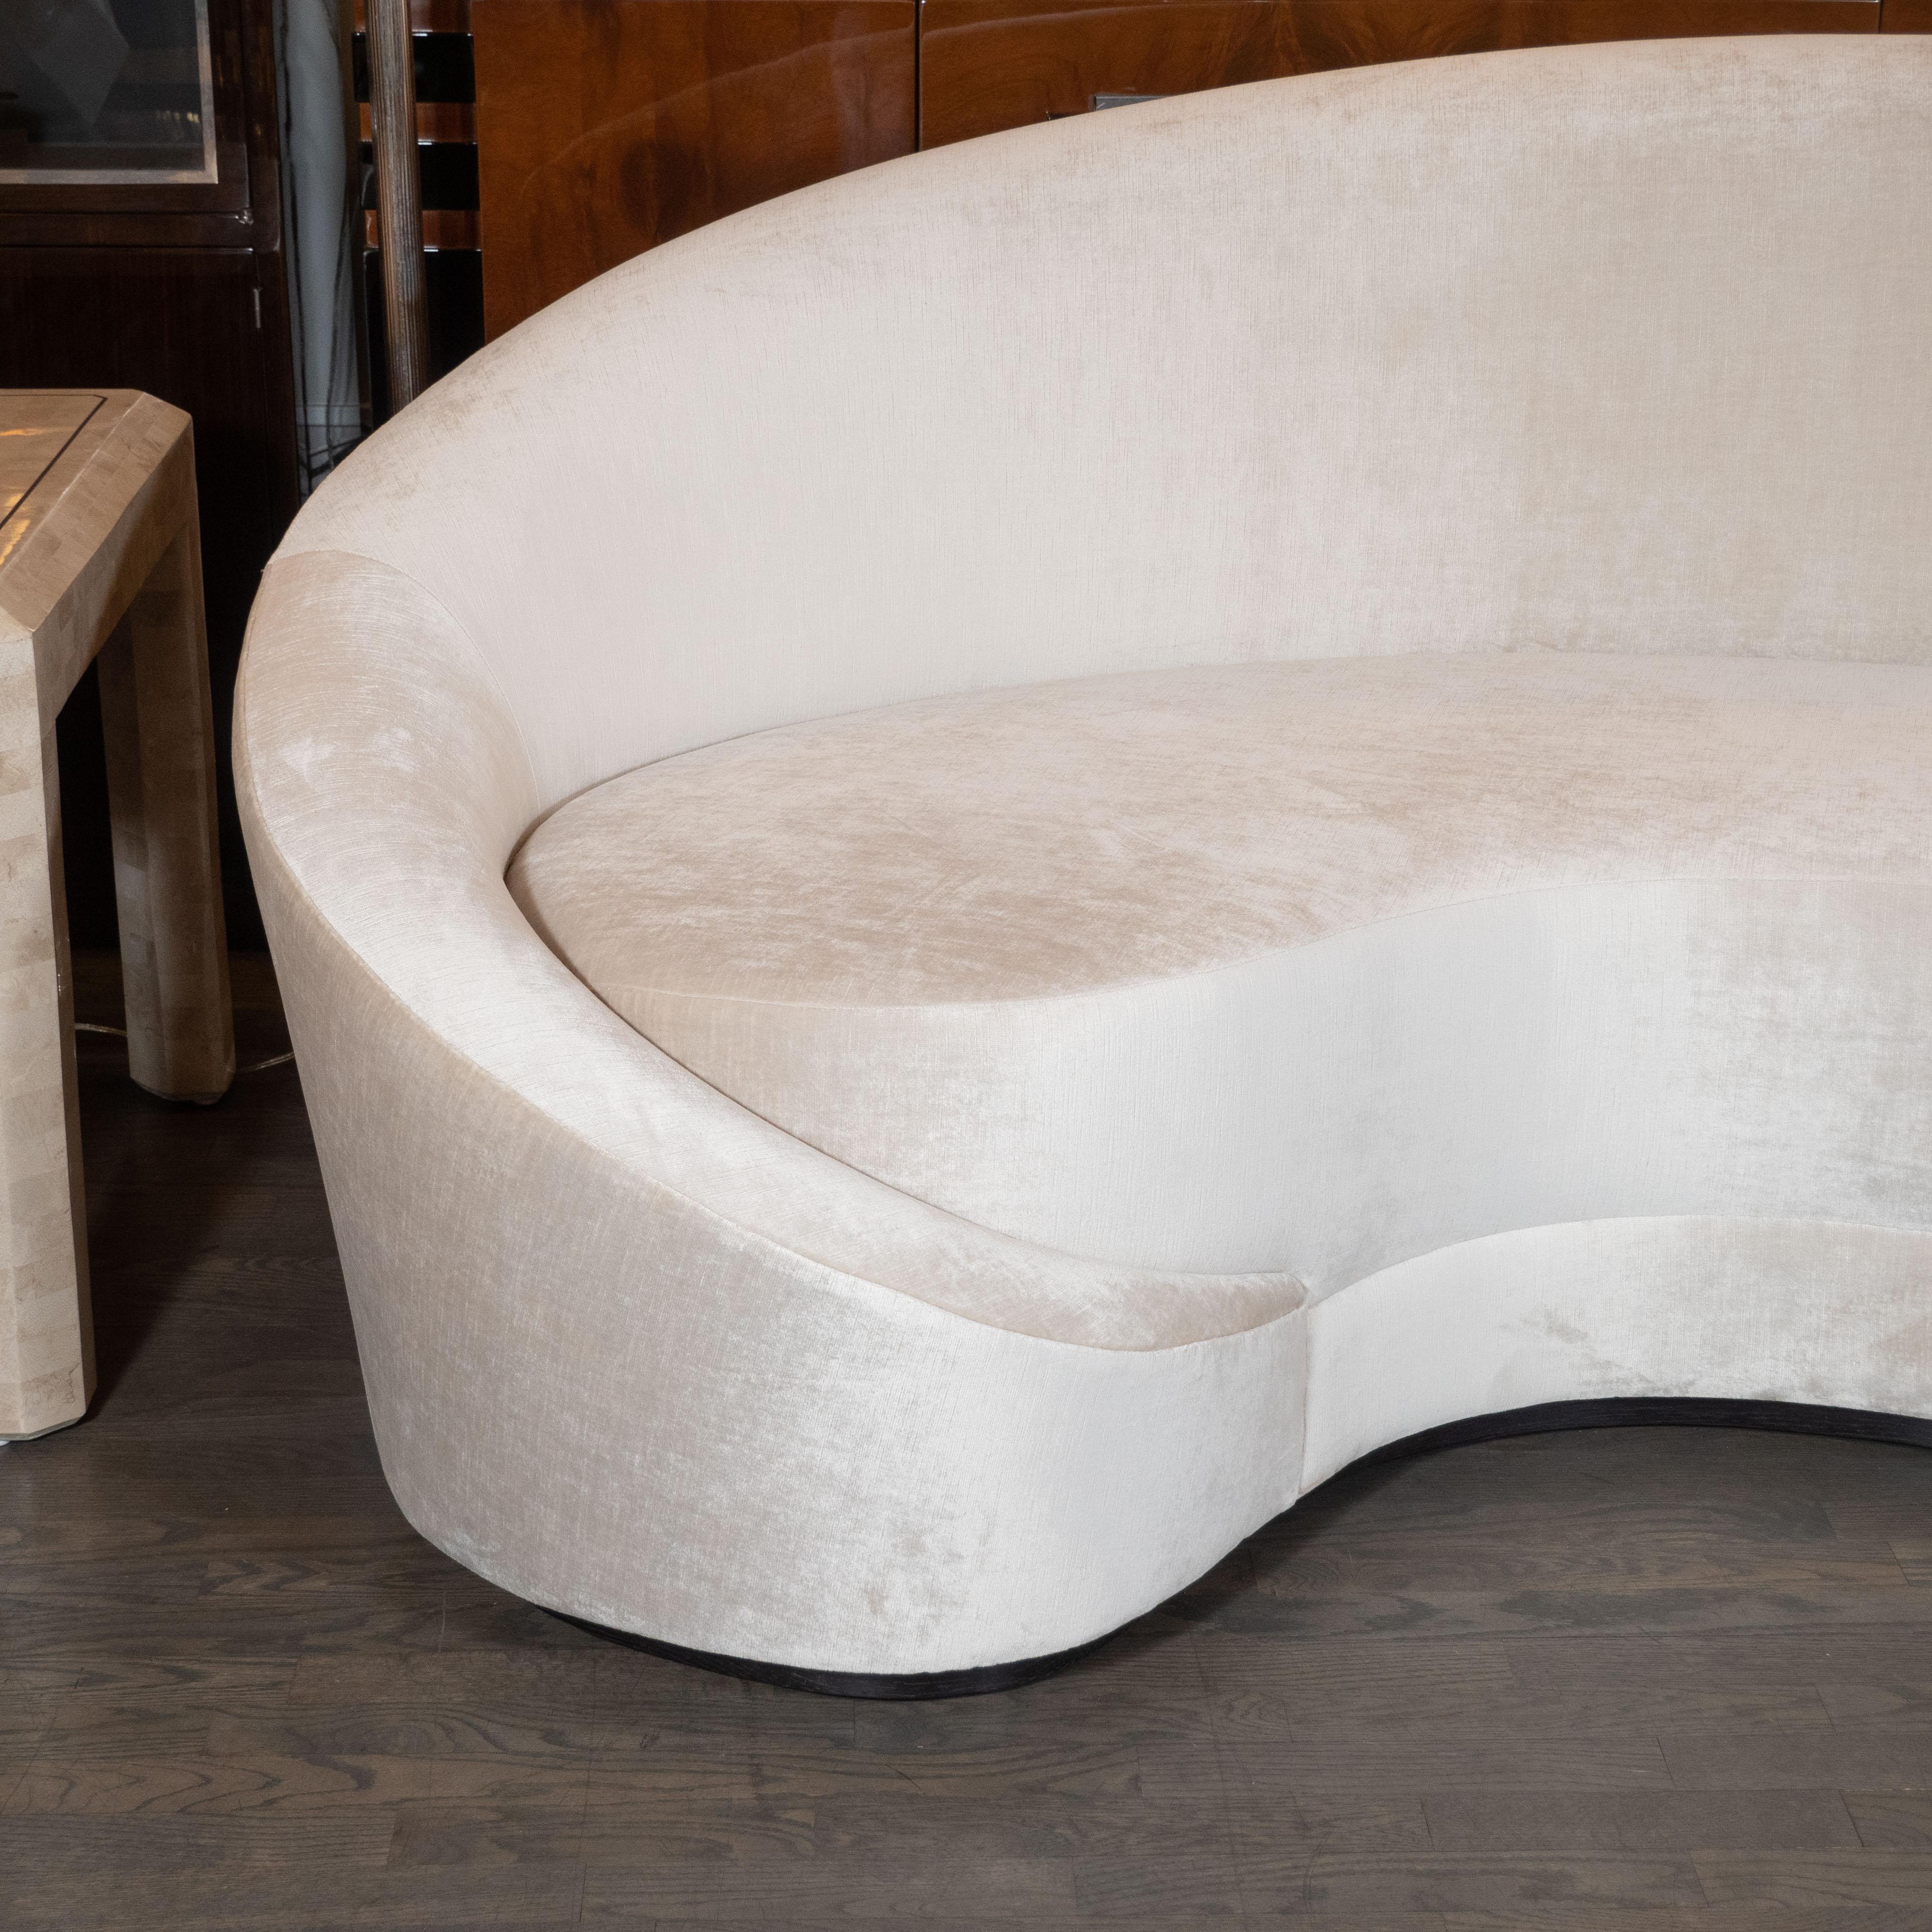 This stunning modernist sofa was handcrafted by artisans in New York state, by High Style Deco, based off a design from the 1940s. It offers elegant proportions and sweeping dramatic curves throughout. Combining the old world sophistication and